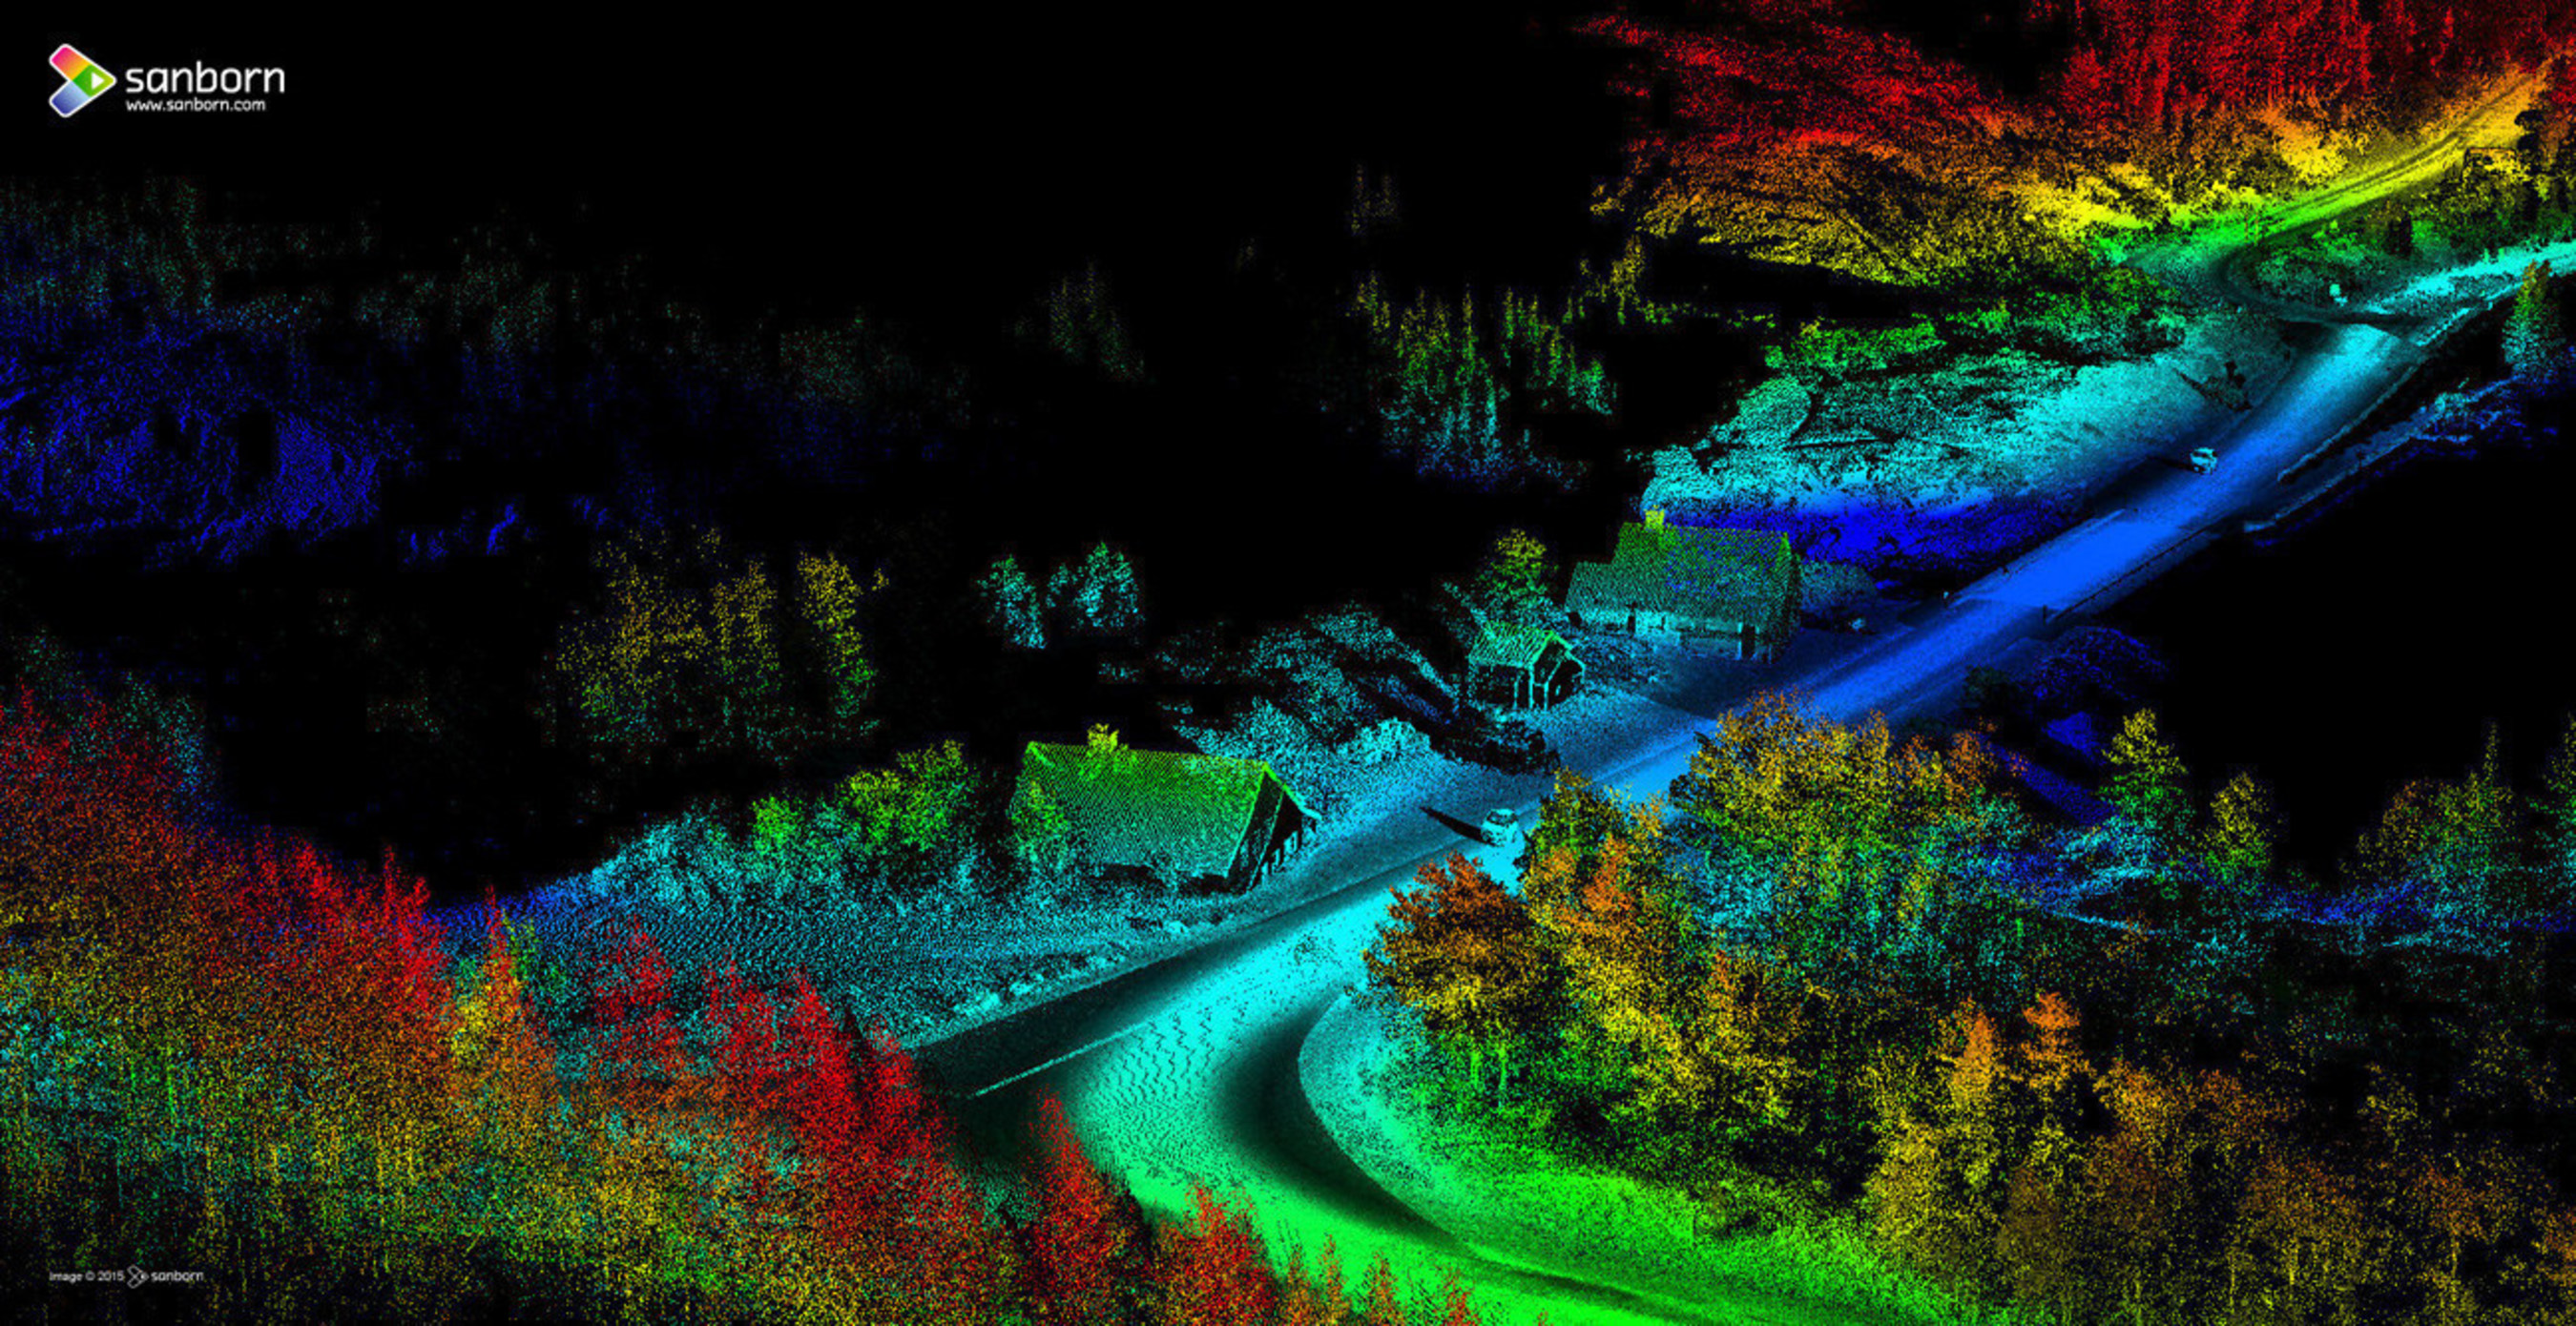 The Sanborn Map Company, Inc. collected this high-resolution mobile light detection and ranging (LiDAR) image of a corridor in Glacier National Park. Sanborn collected more than 40 miles of LiDAR imagery in Glacier and Yellowstone national parks for the analysis, planning and engineering of critically needed road resurfacing.